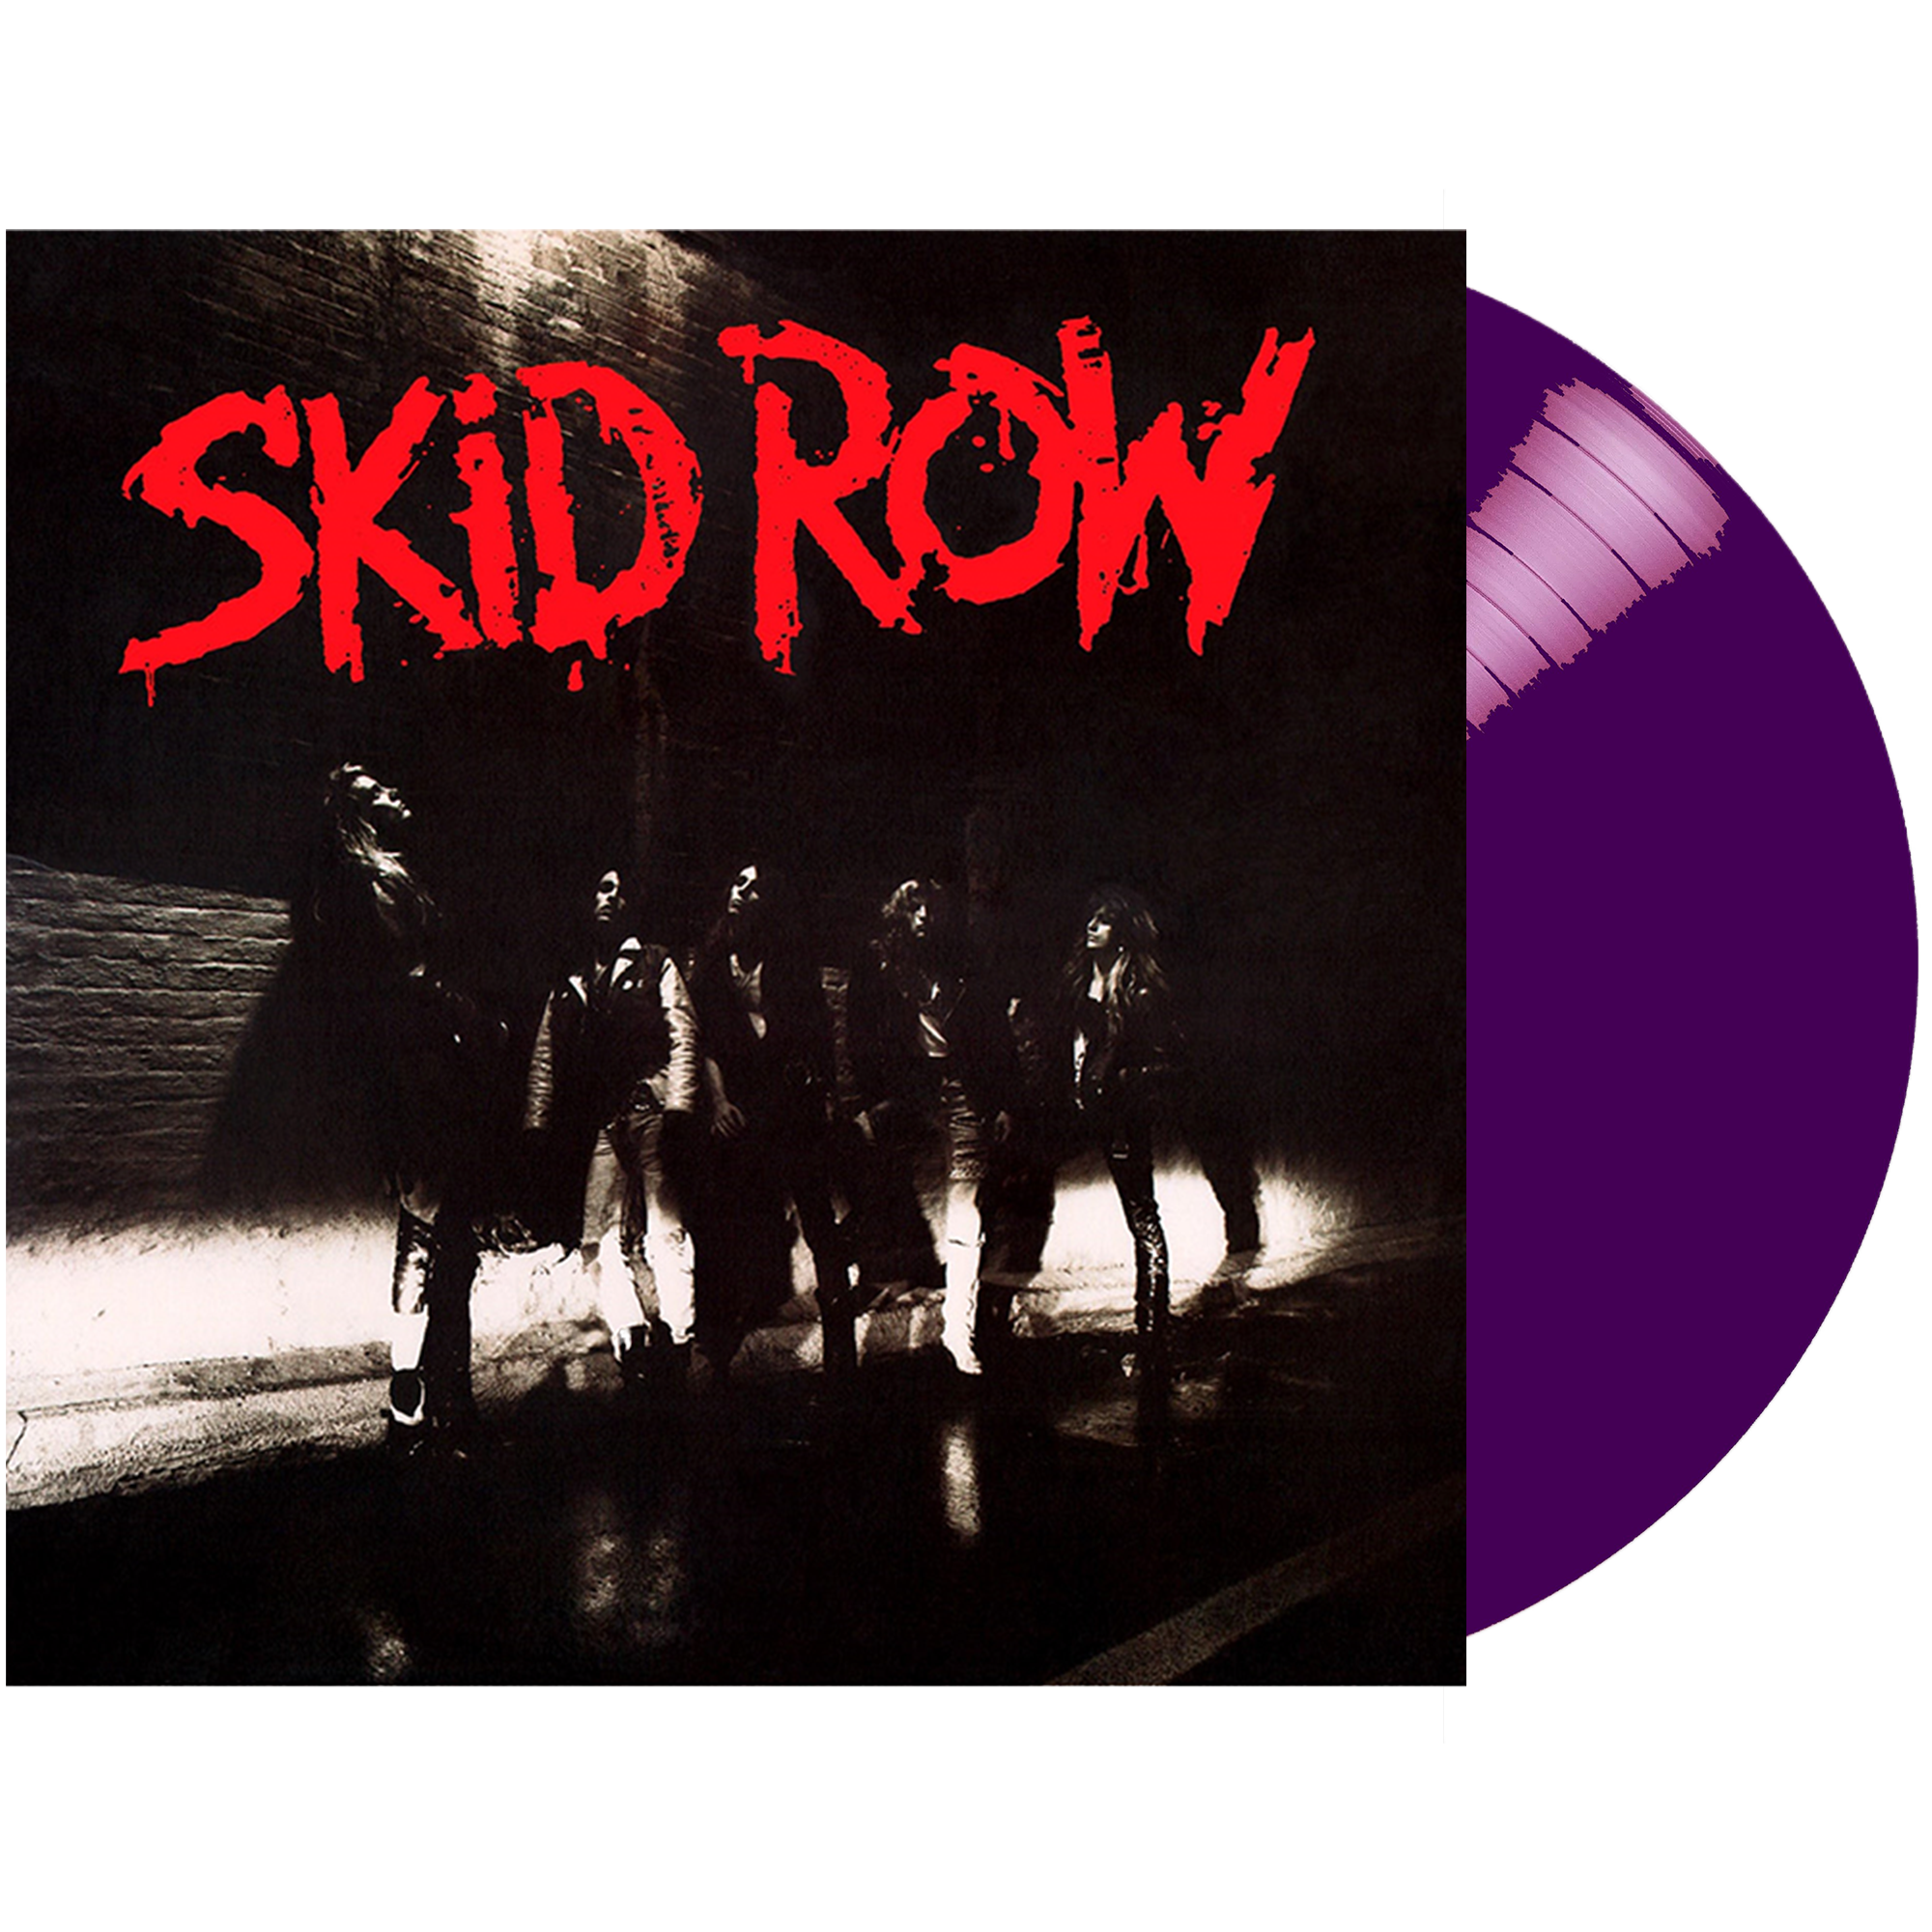 Skid Row Album Cover SUBLIMATION (400°) – Chase Design Co.